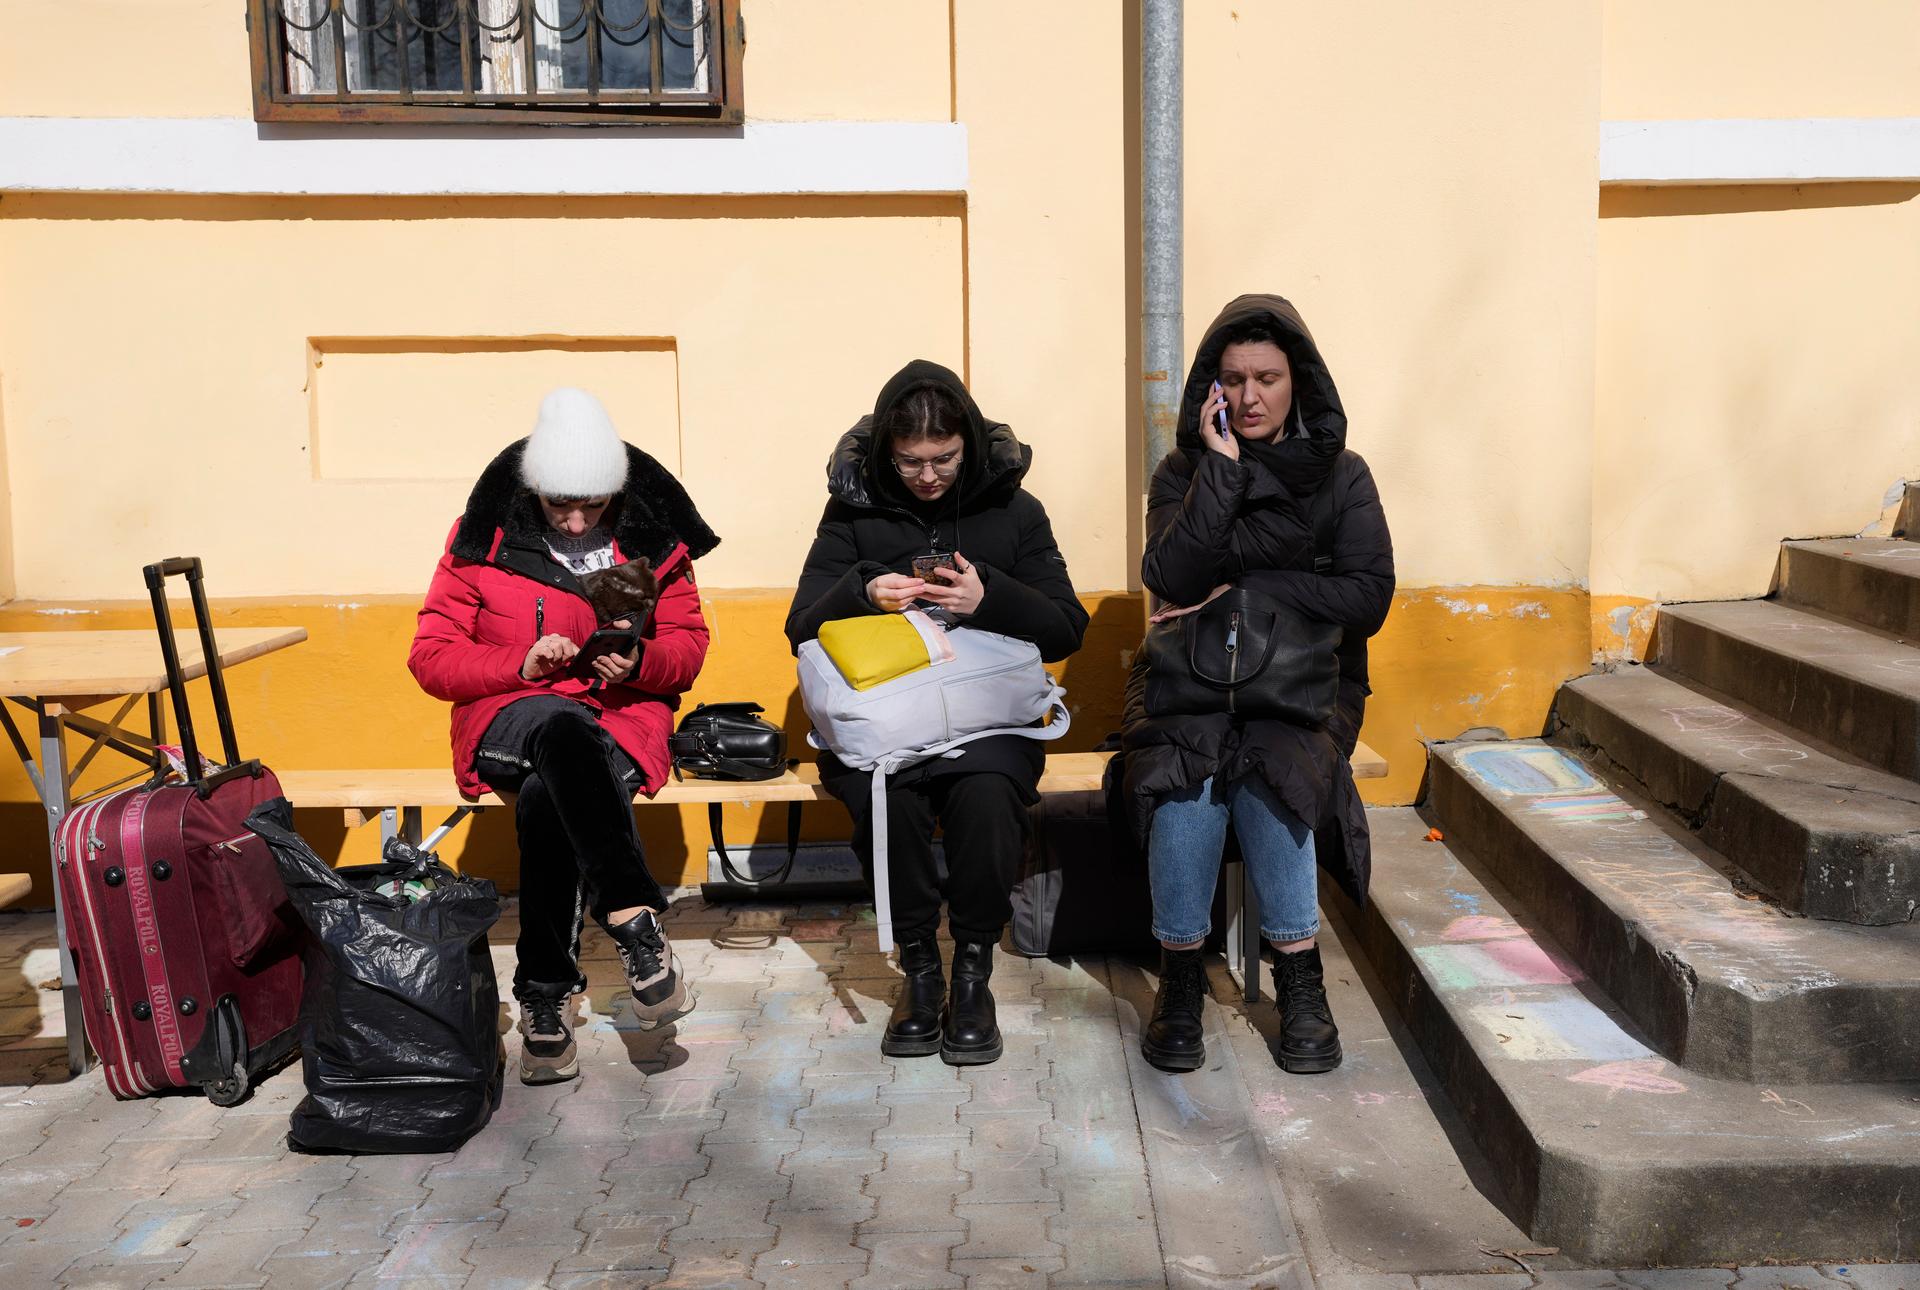 Three women displaced by the Russian invasion of Ukraine check their mobile phones at a refugee centre in Hungary. 